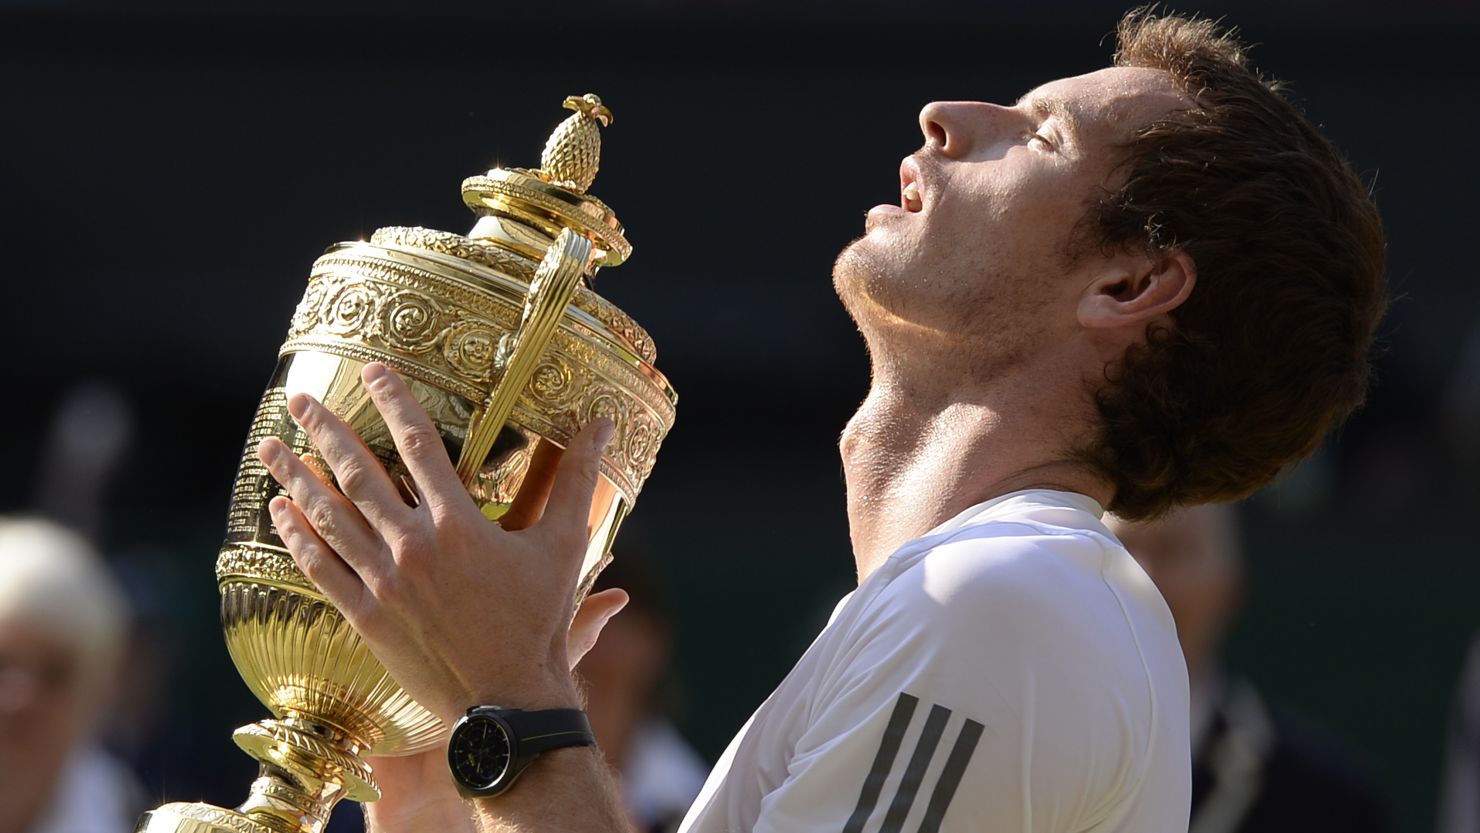 Britain's Andy Murray holds the winner's trophy after beating Serbia's Novak Djokovic in the men's singles final at the Wimbledon championships.